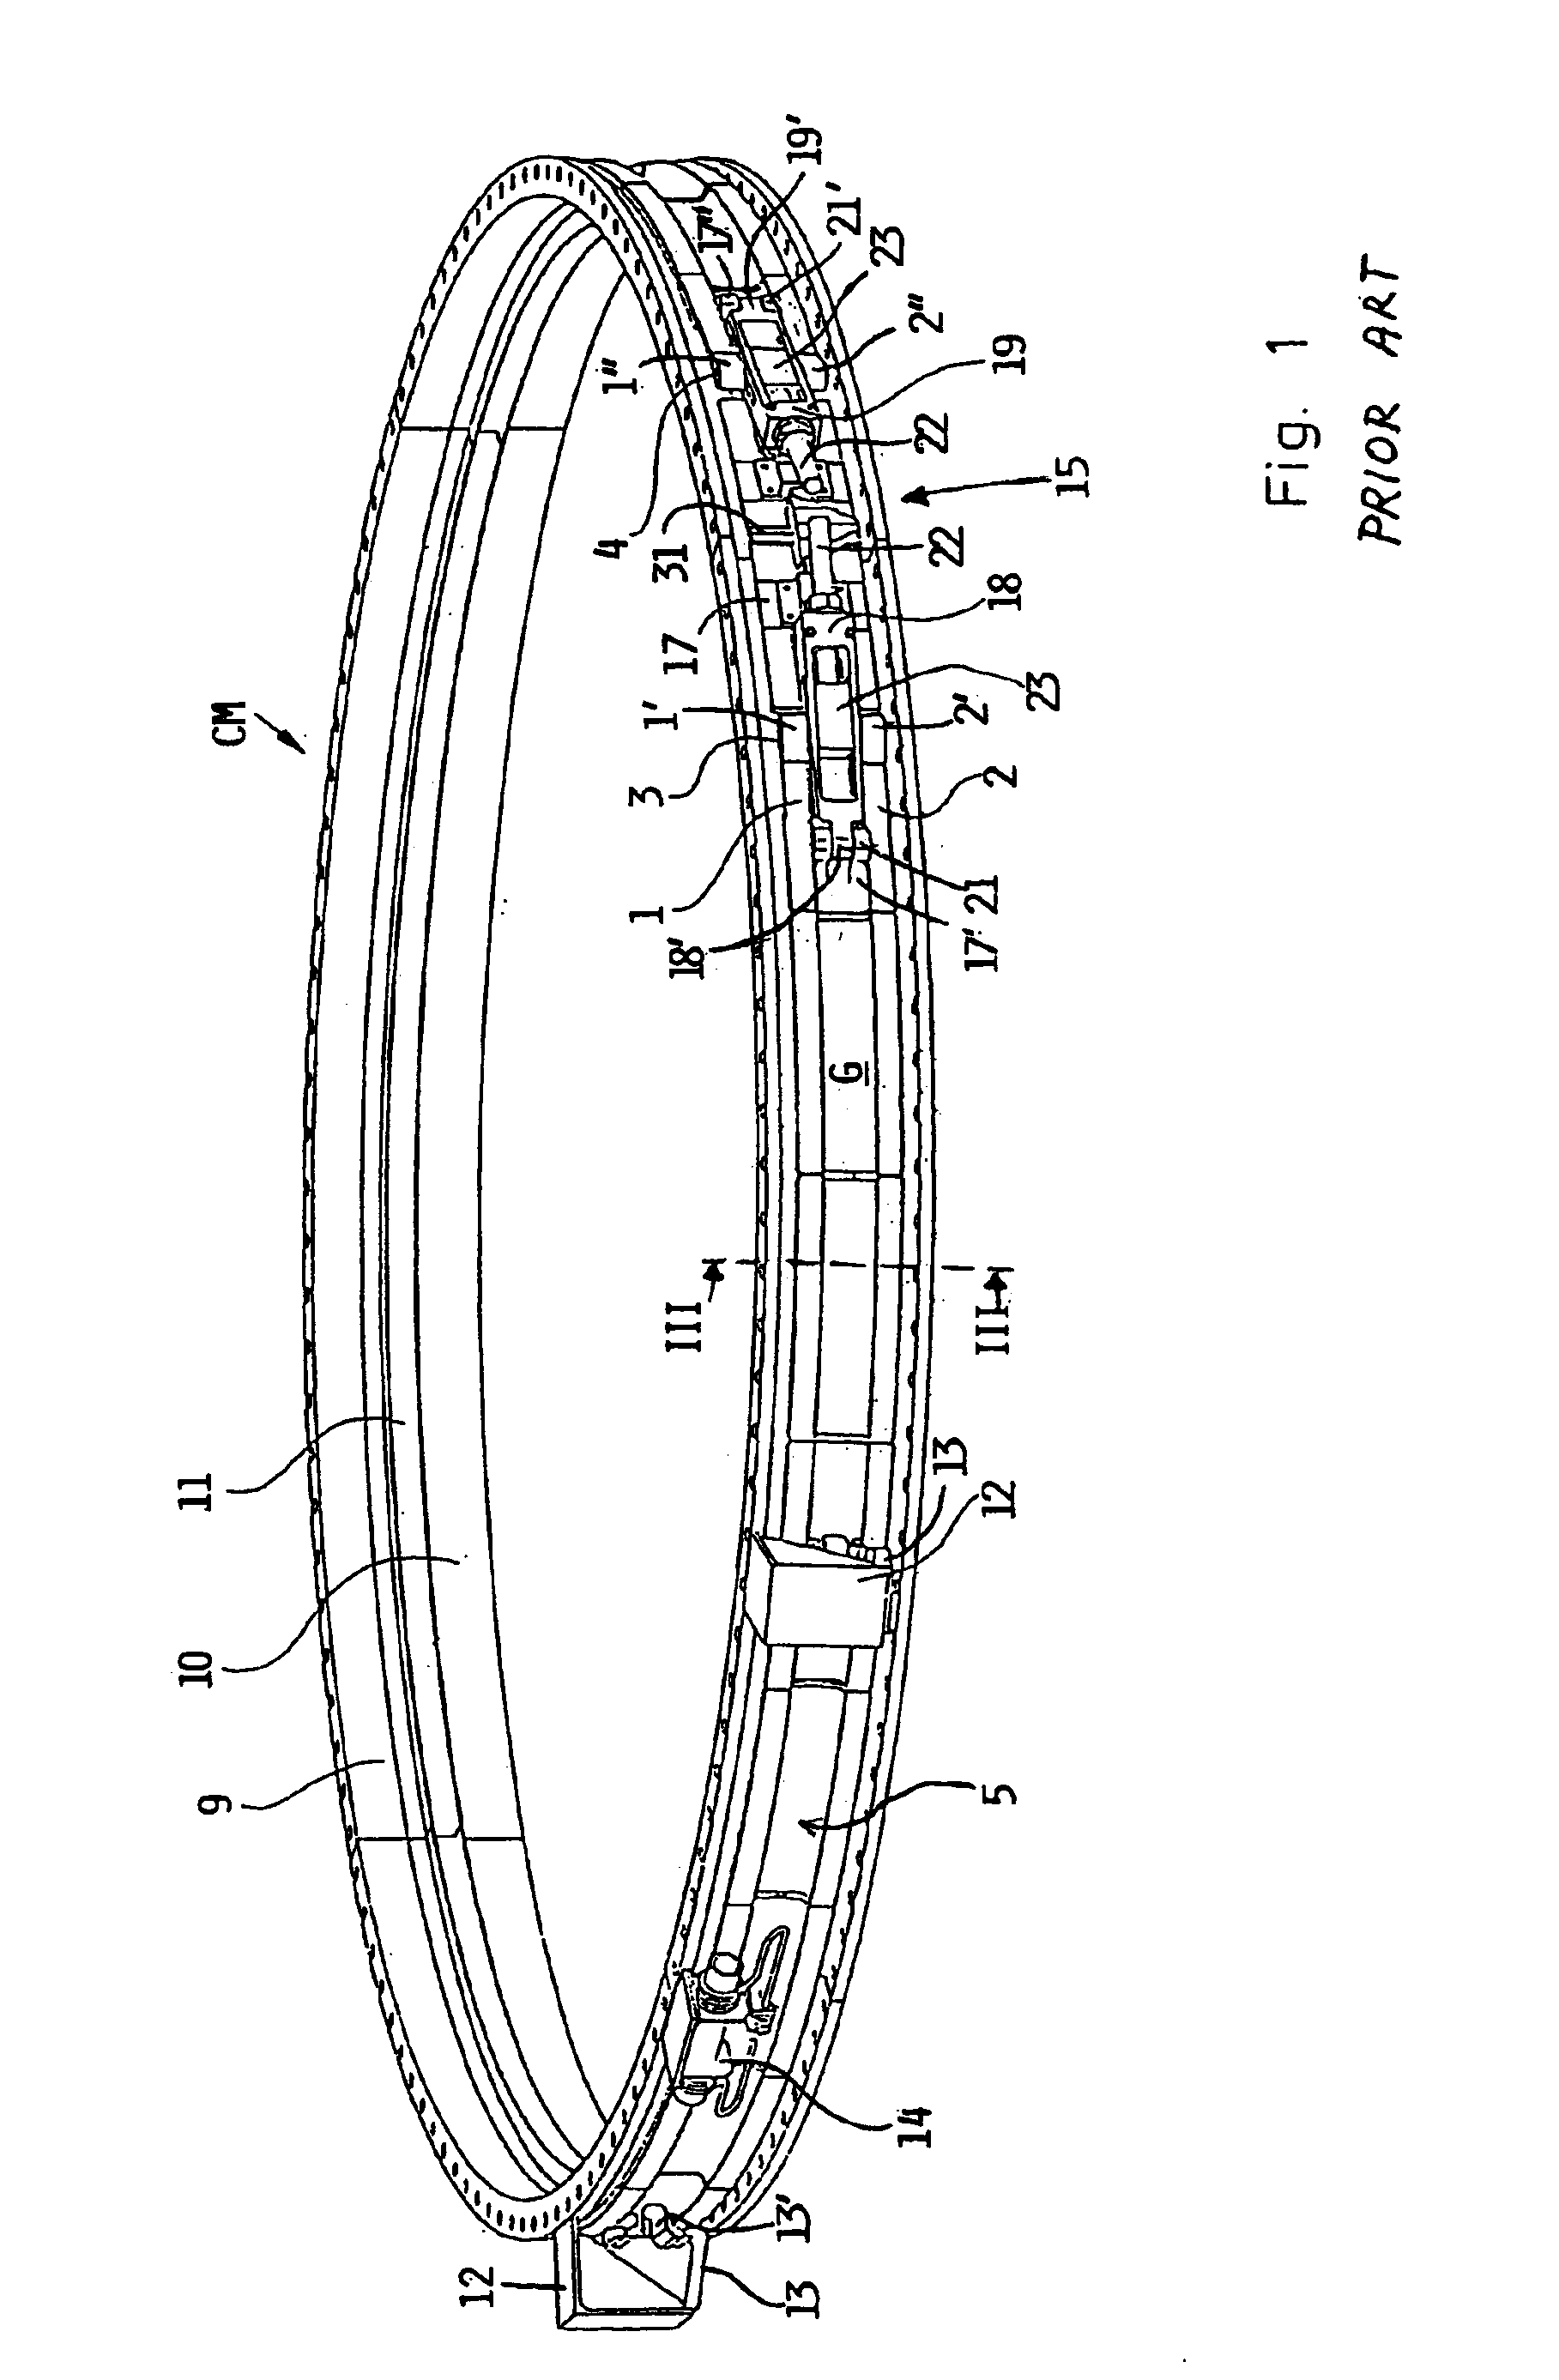 Apparatus for releasably interconnecting structural components having a rotational symmetry